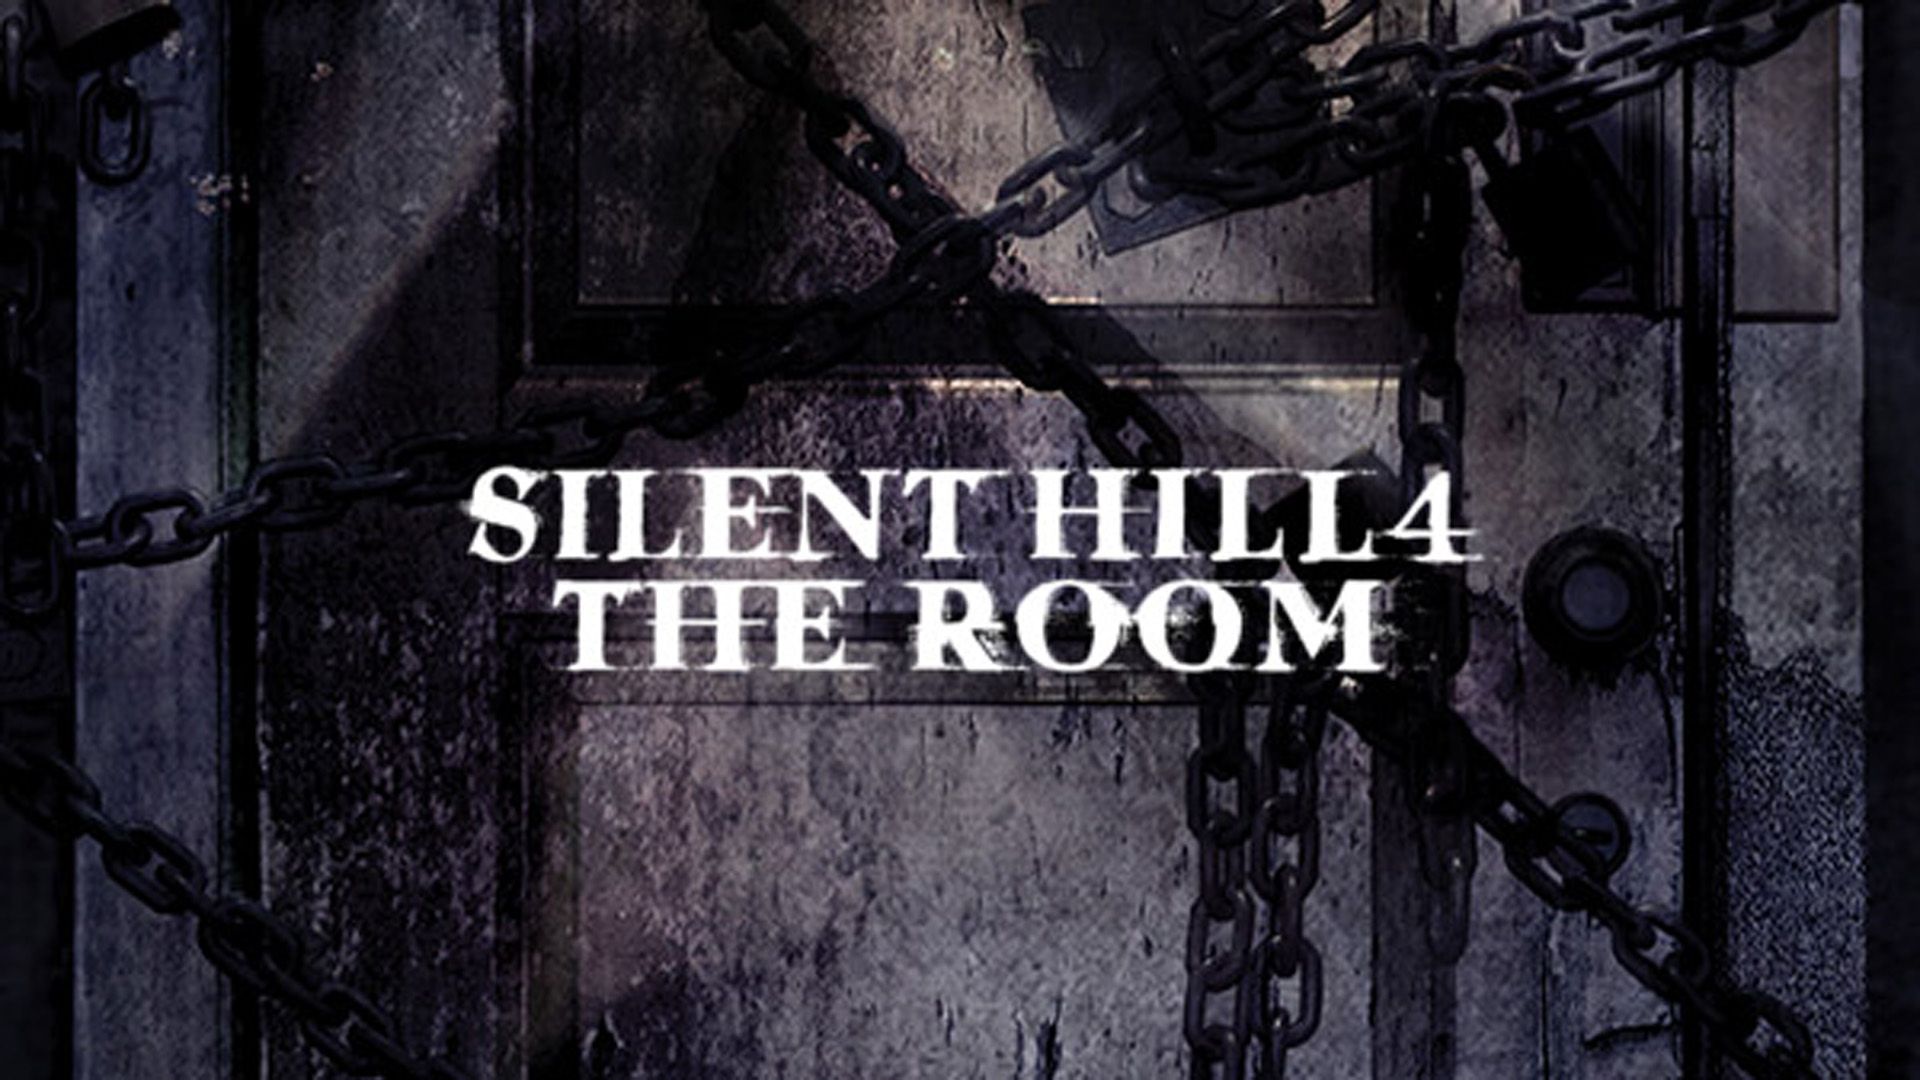 SH4) Silent Hill 4: The Room Becomes Available On GOG (PC)